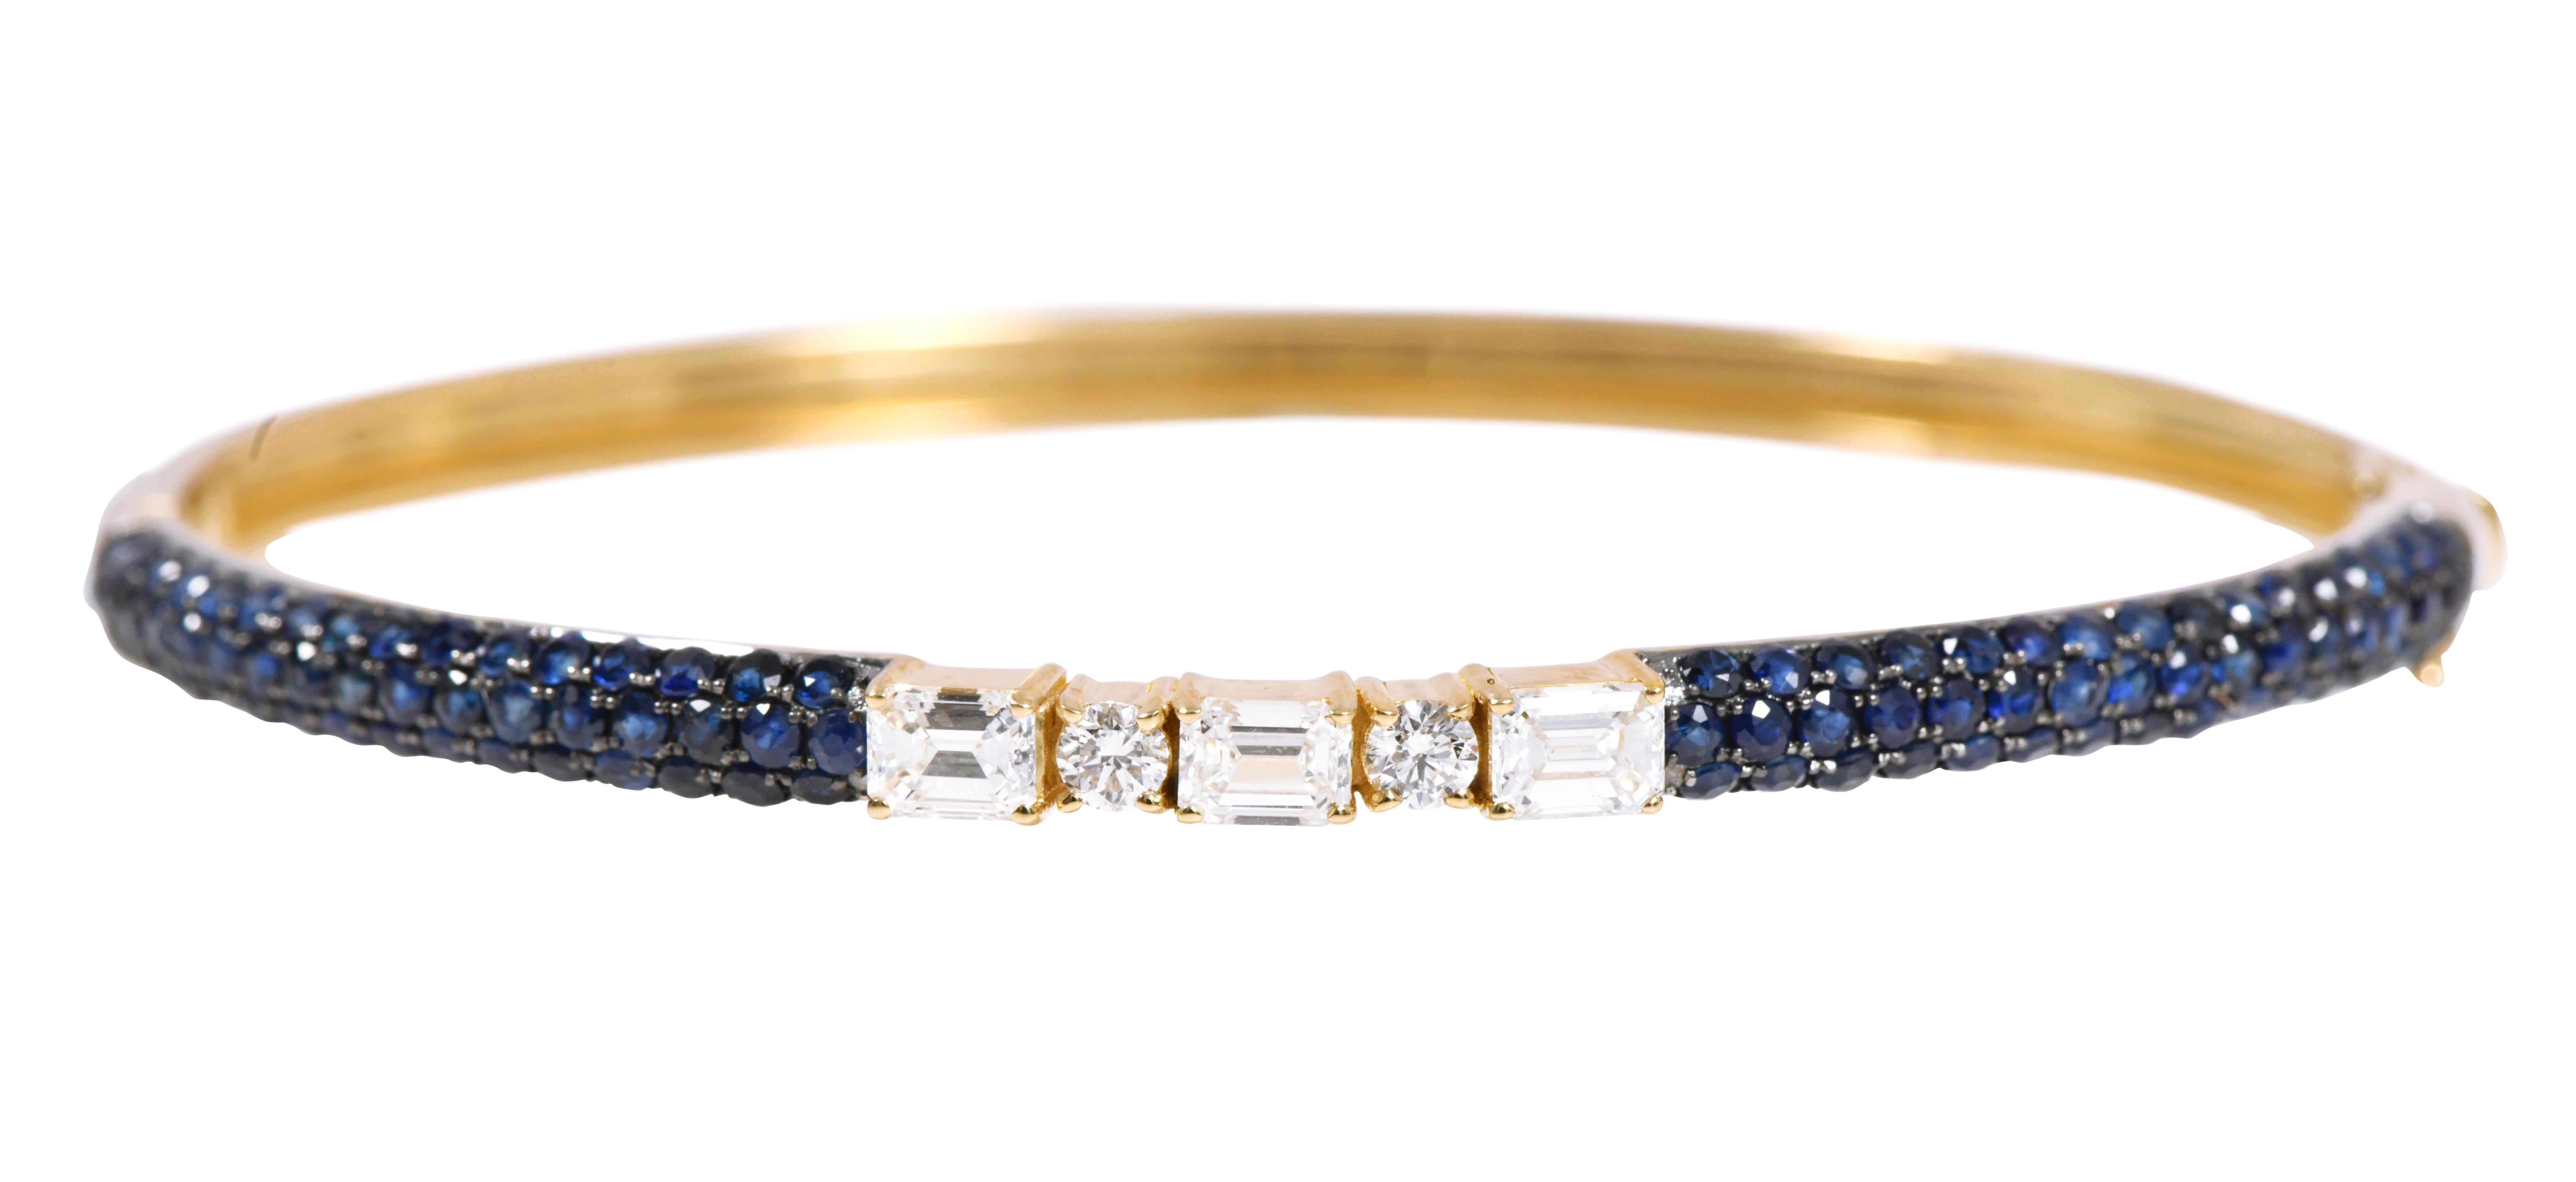 18 Karat Gold 3.22 Carat Sapphire and Diamond Tennis Bangle

Nothing glams a party better than some exquisite pieces of jewelry to adorn. A perfect combination of some finest diamonds and gemstones is all you need to look your most graceful at any